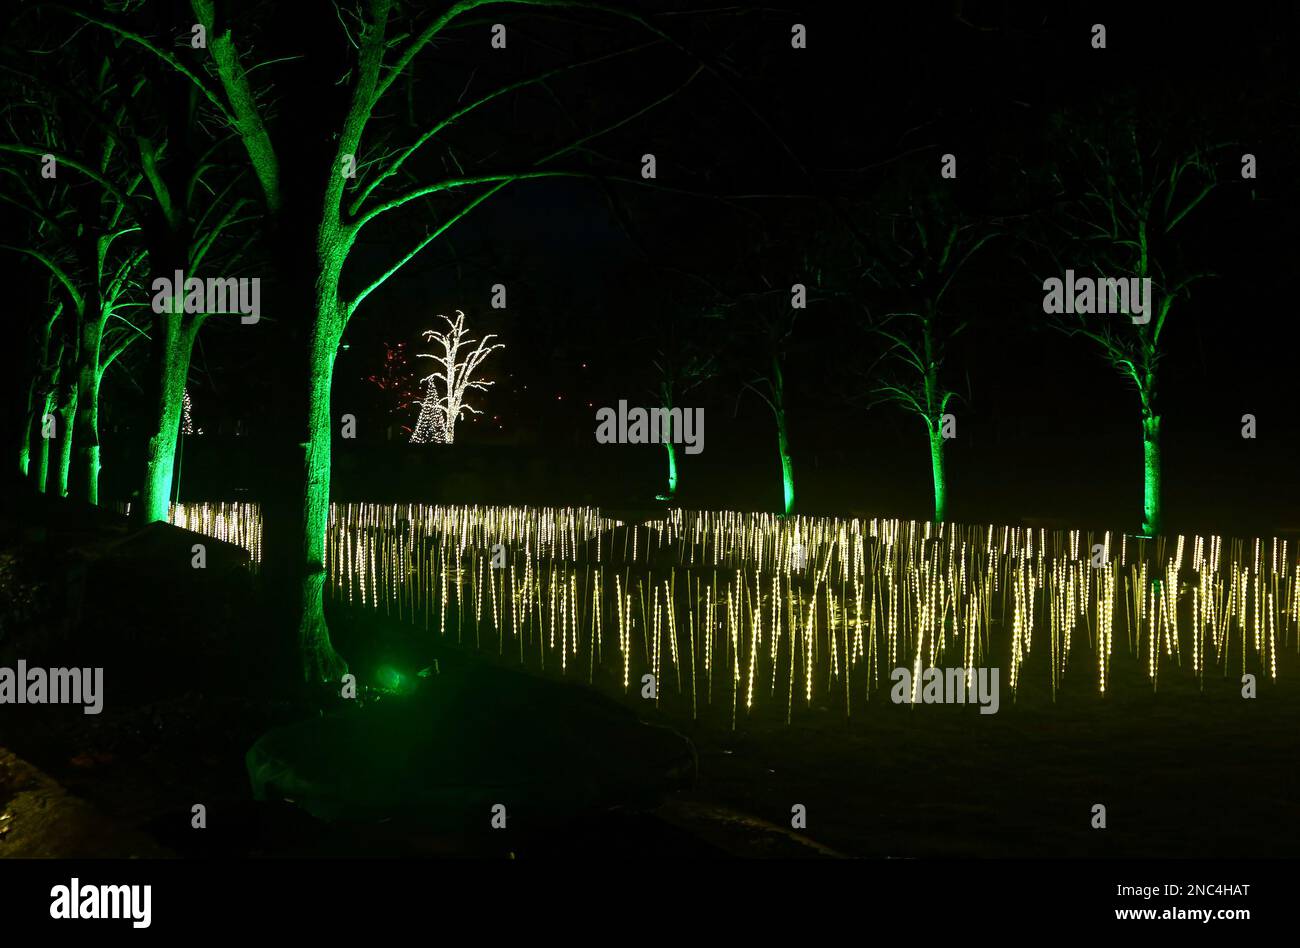 outdoor Christmas lights, field of white spikes, green tree trunks, distant trees with white lights, black background, night, festive, holiday, dramat Stock Photo